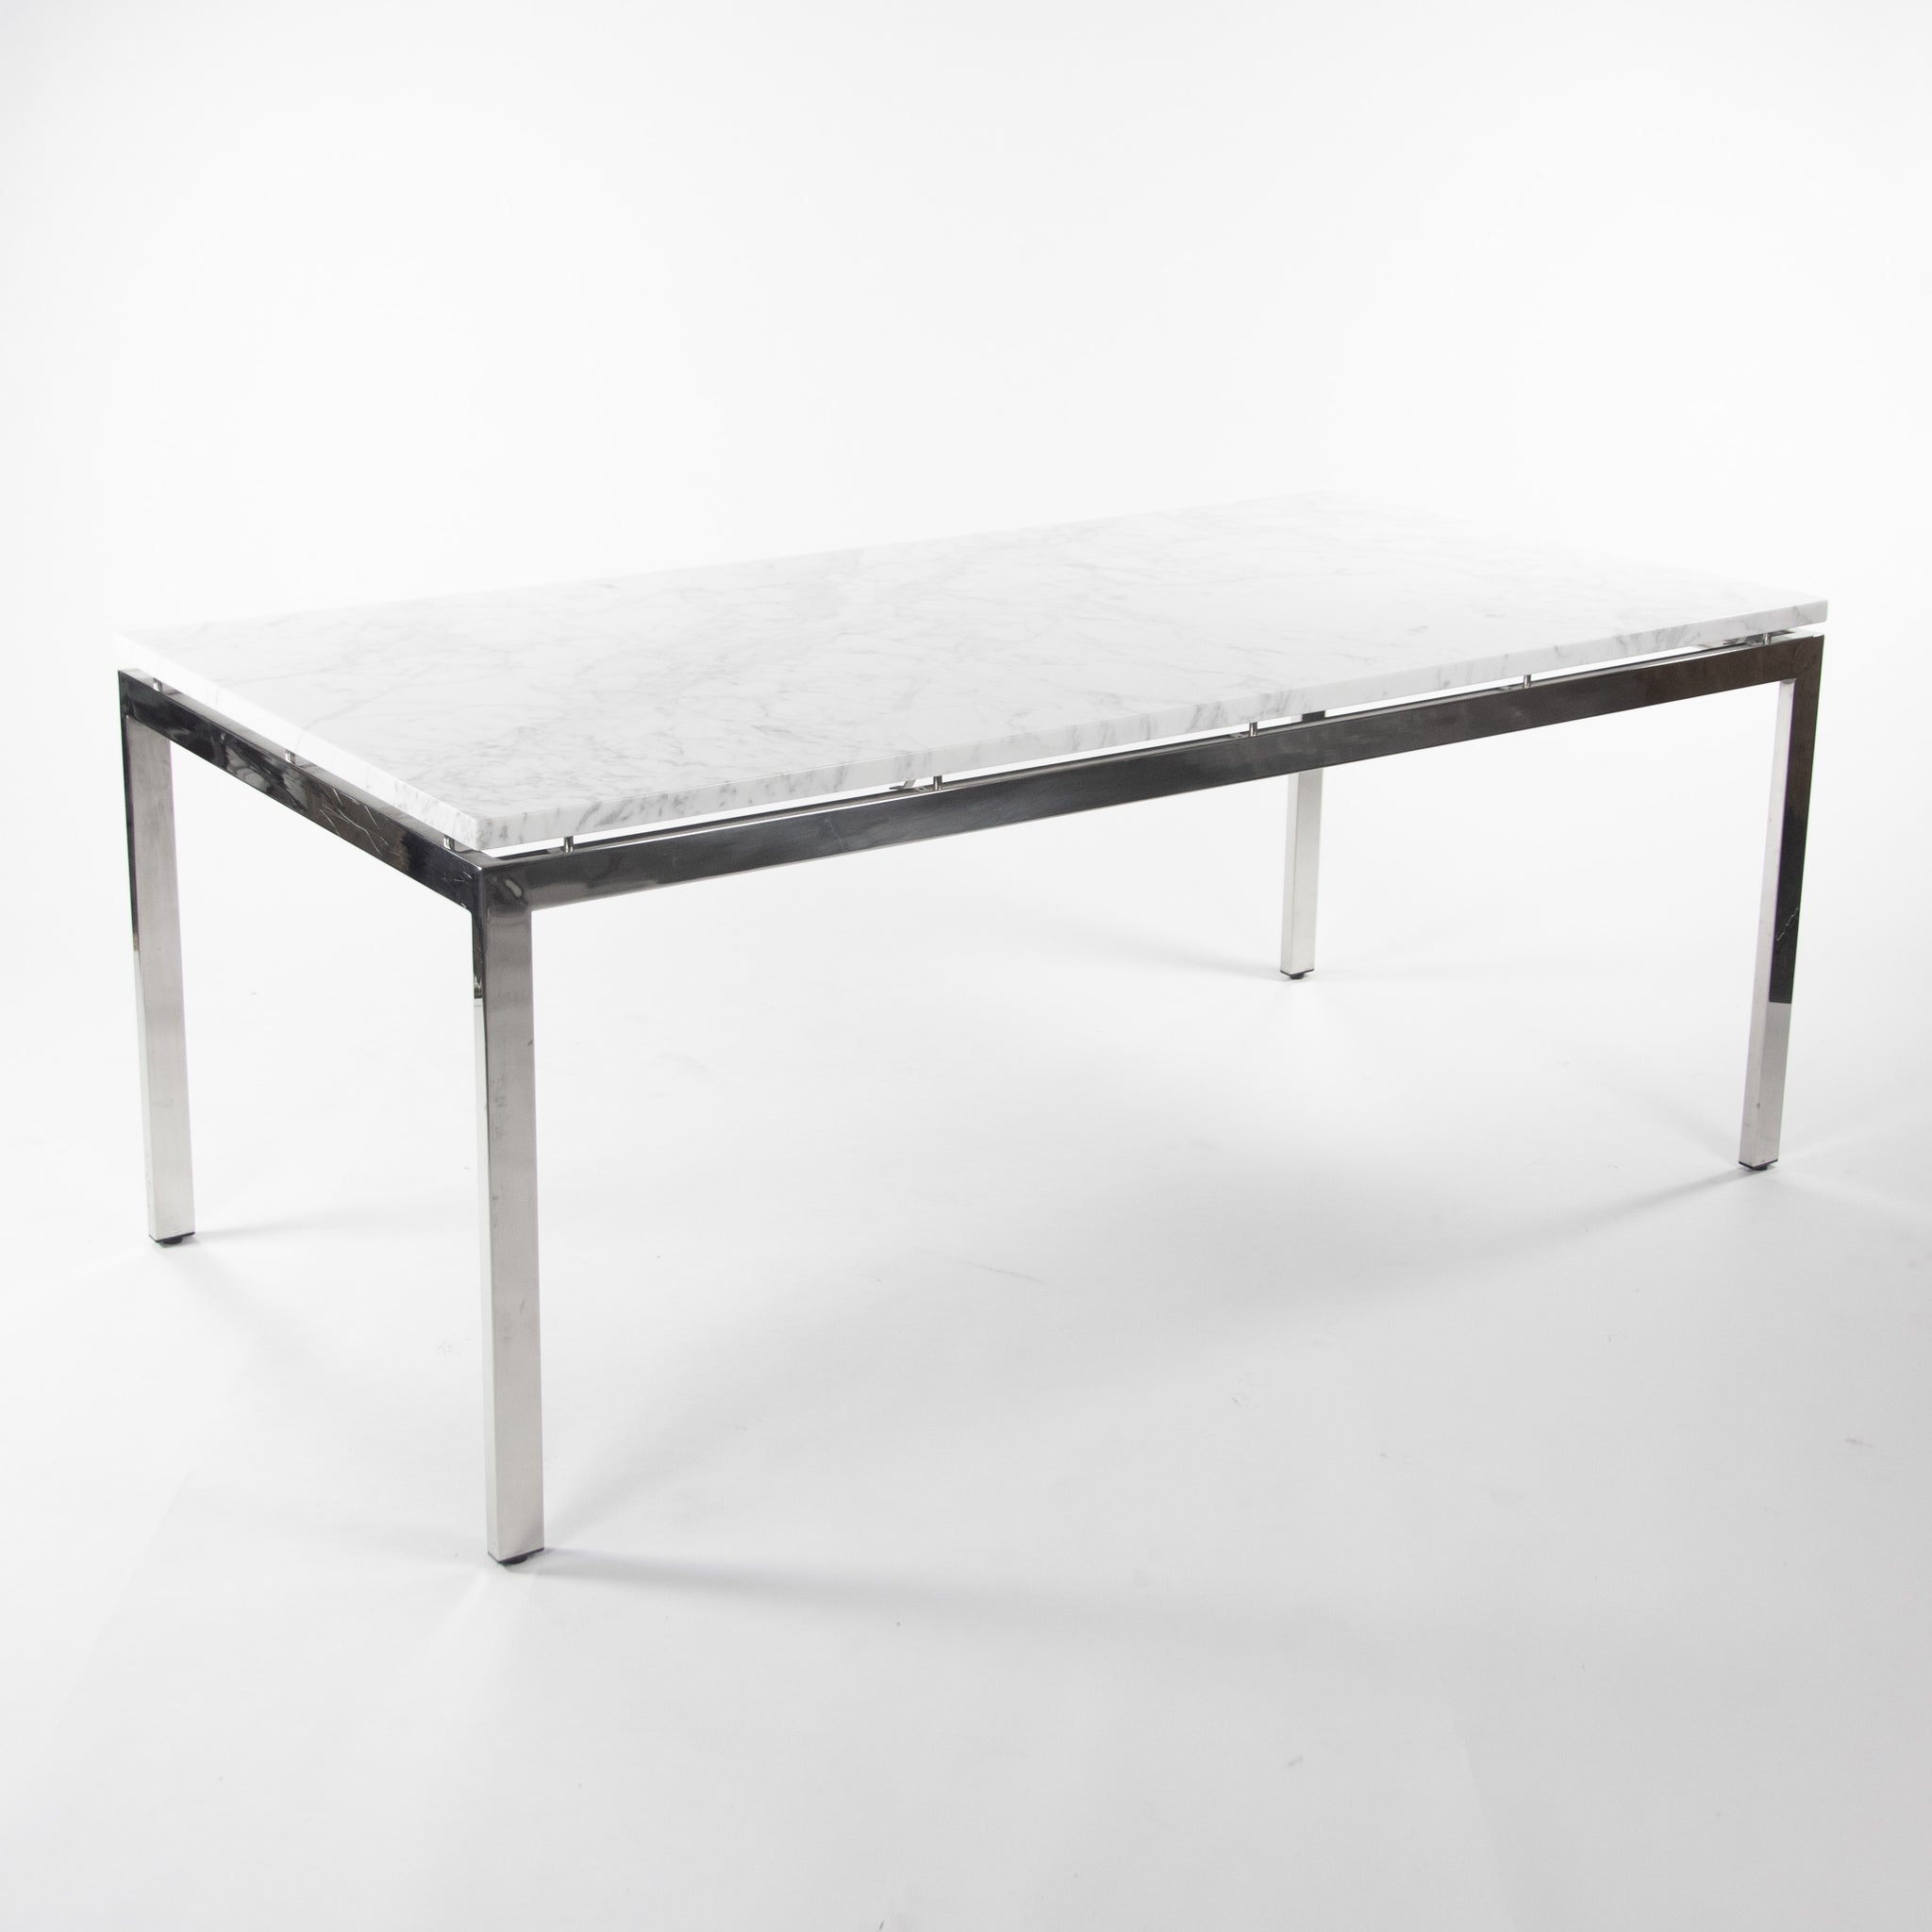 SOLD Marble 2011 Cumberland Meeting Dining Table Desk White w/ Stainless Base Knoll